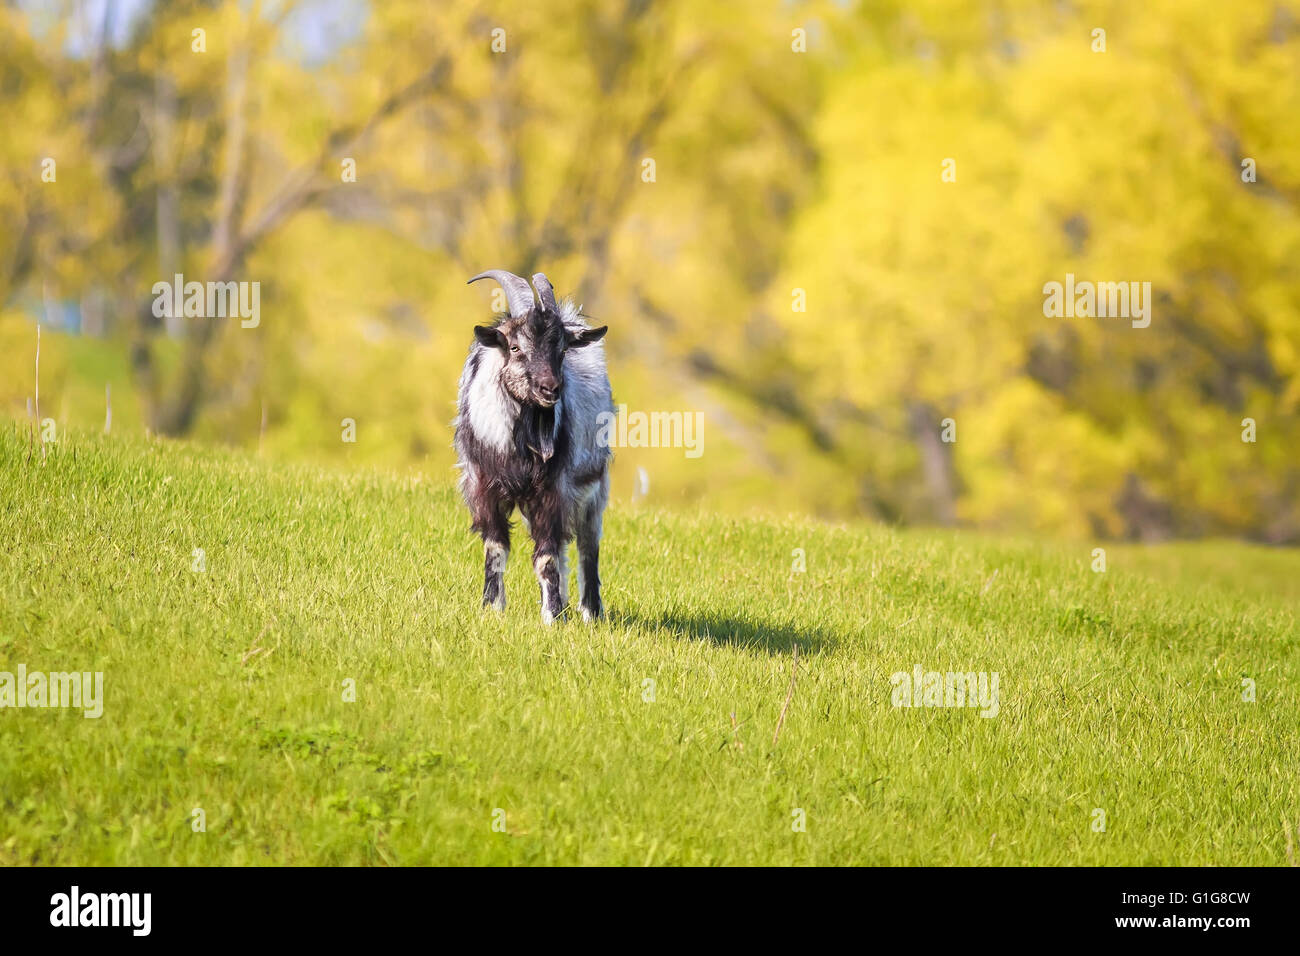 goat, grass, goats, farm, white, green, horns, animal, nature, domestic, field, pasture, meadow, head Stock Photo